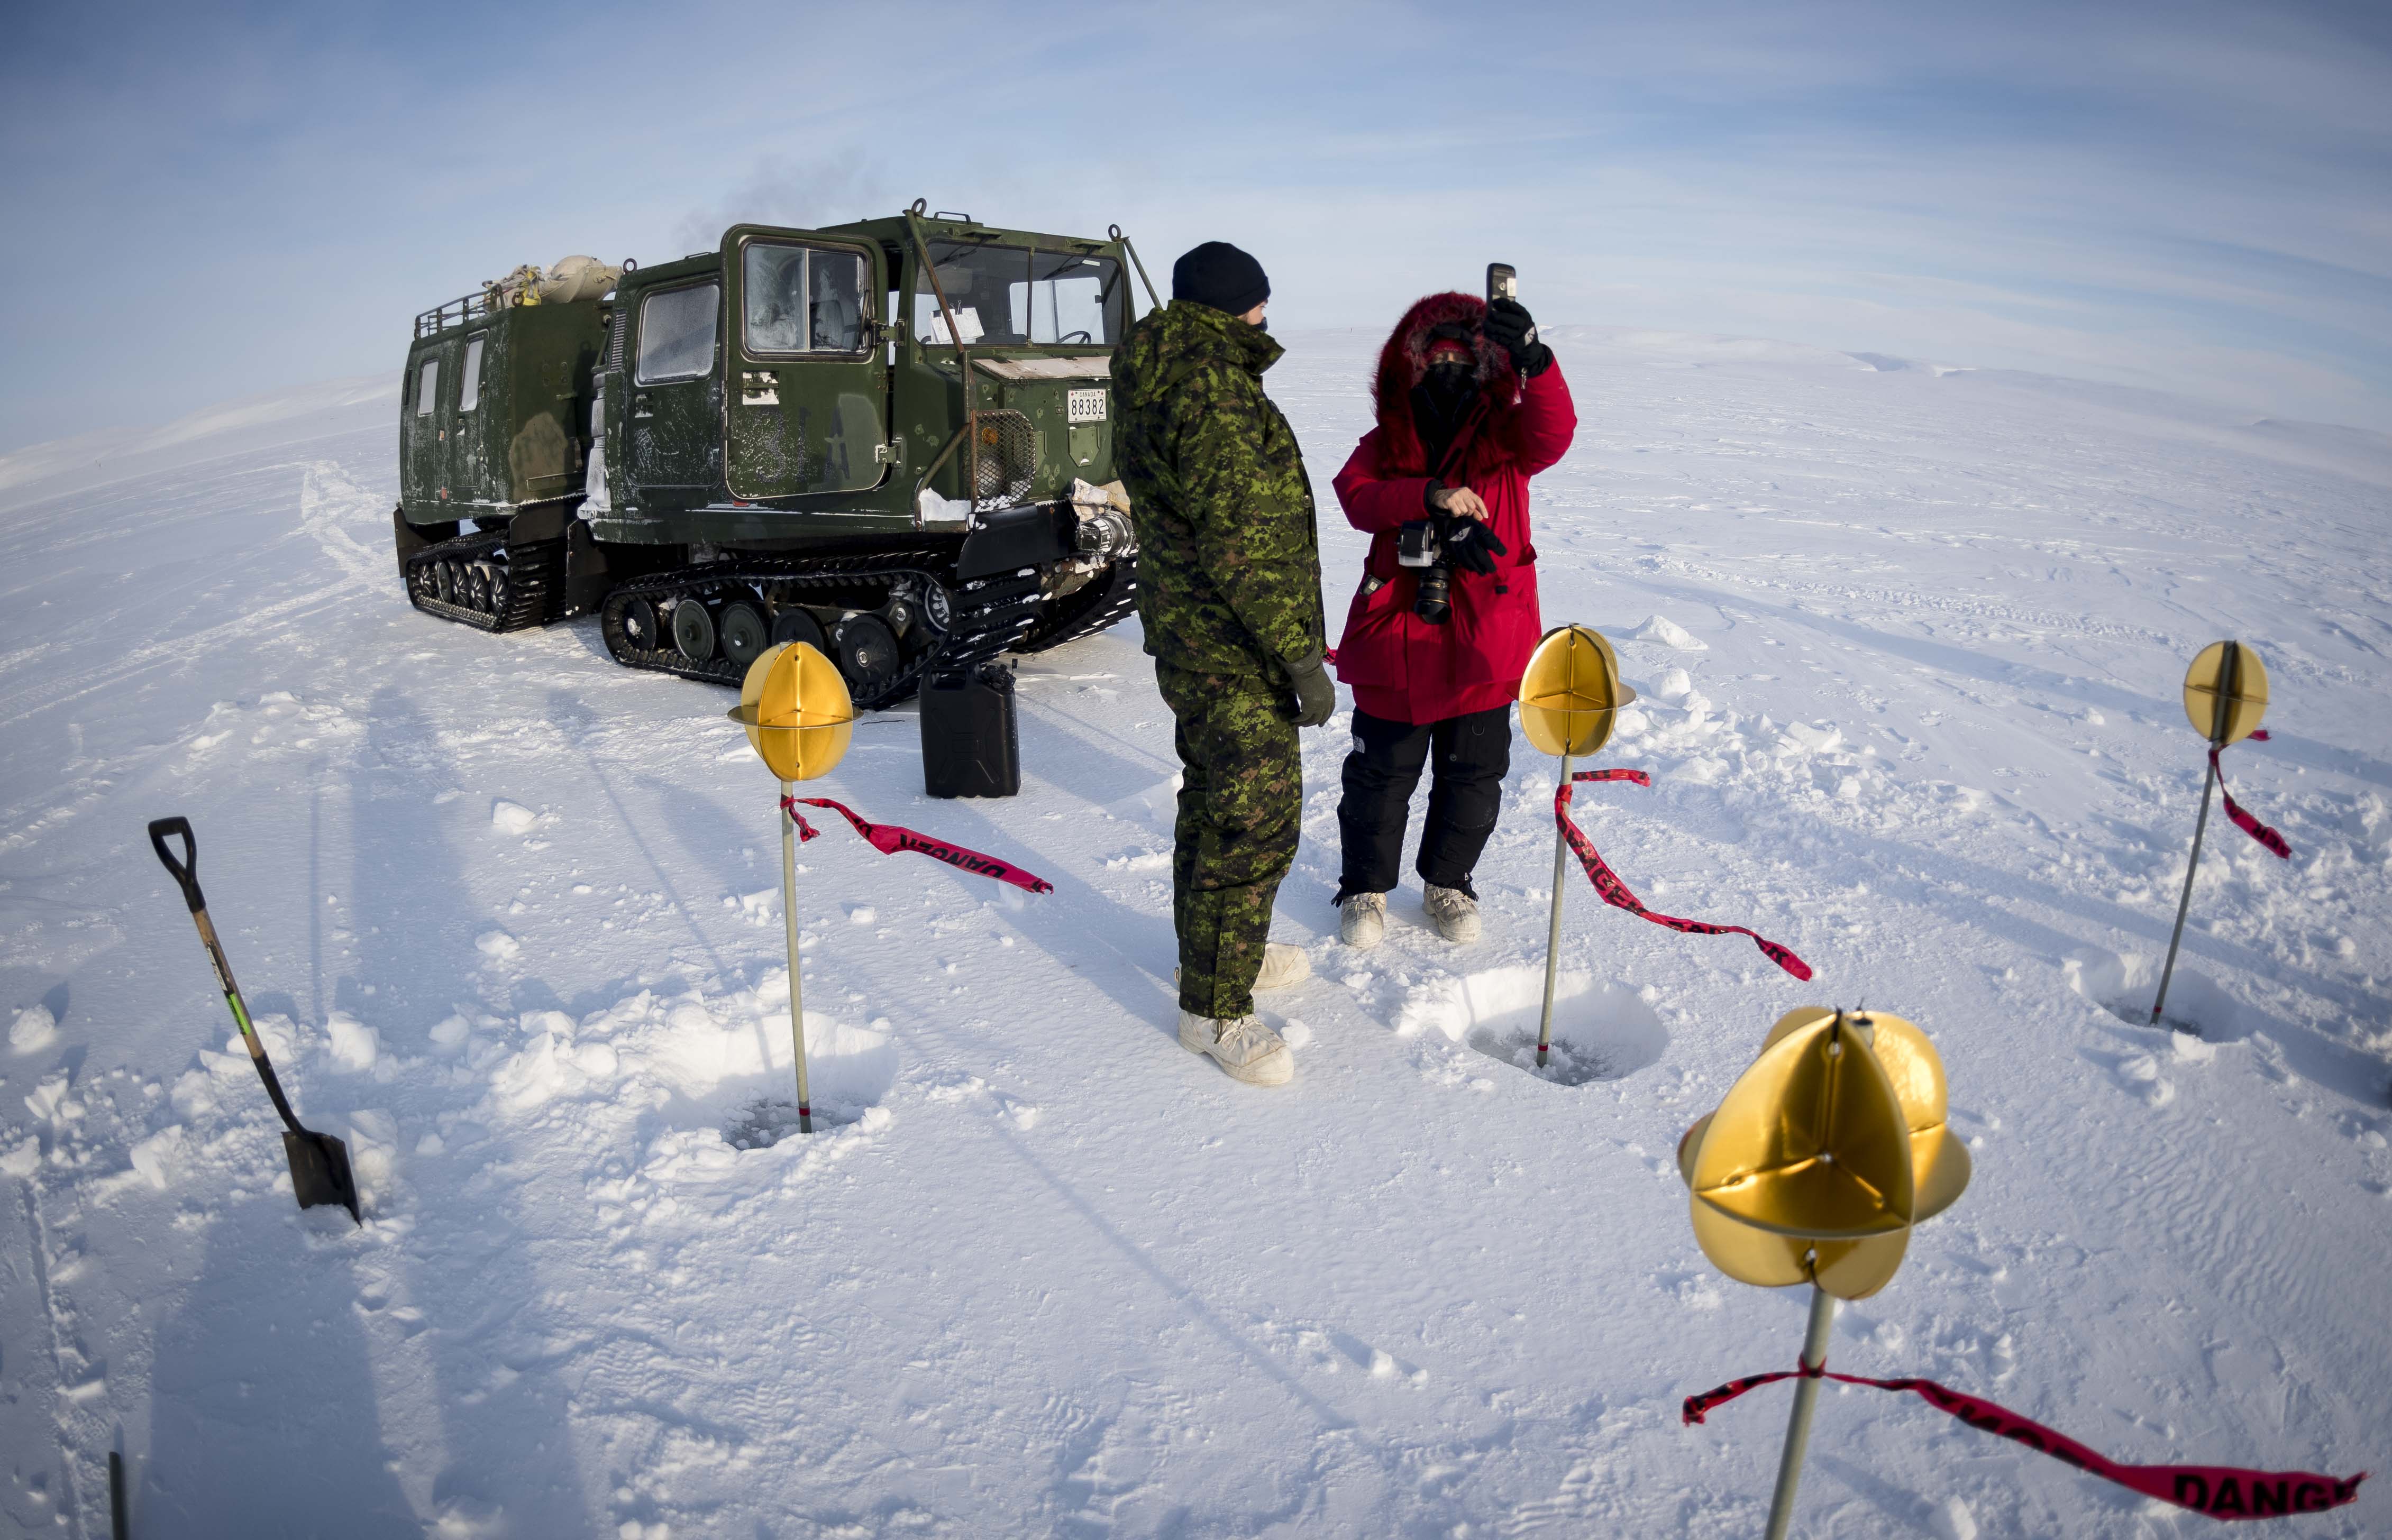 Two people, one wearing a camouflage uniform and the other winter clothing, stand in snow in front of a green tracked vehicle. Around them are small poles planted in the snow with round yellow objects at their tip.